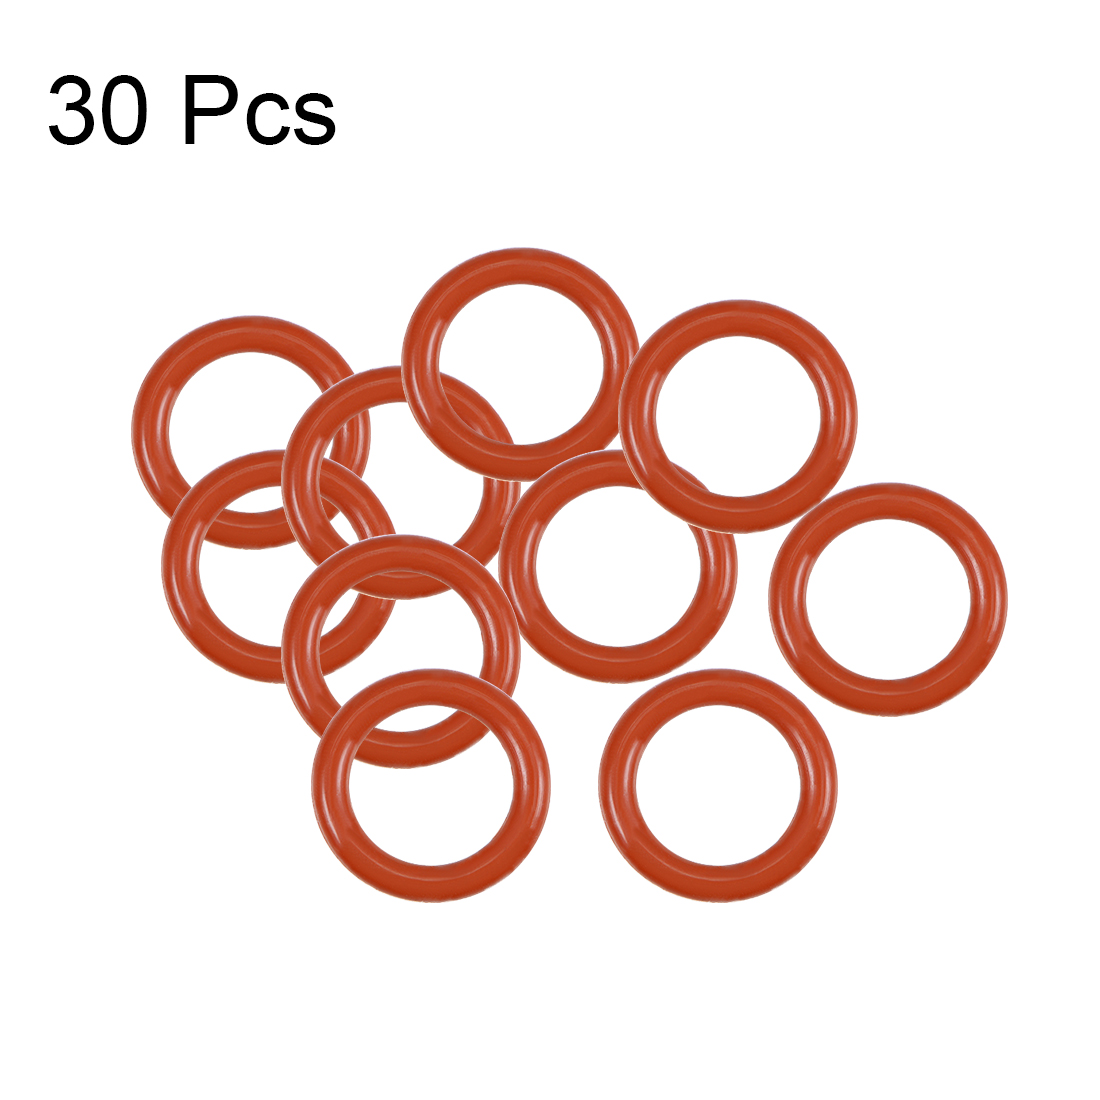 Unique Bargains Silicone O-Rings 9.5mm OD, 6.5mm ID, 1.5mm Width, Seal Gasket Red 30Pcs